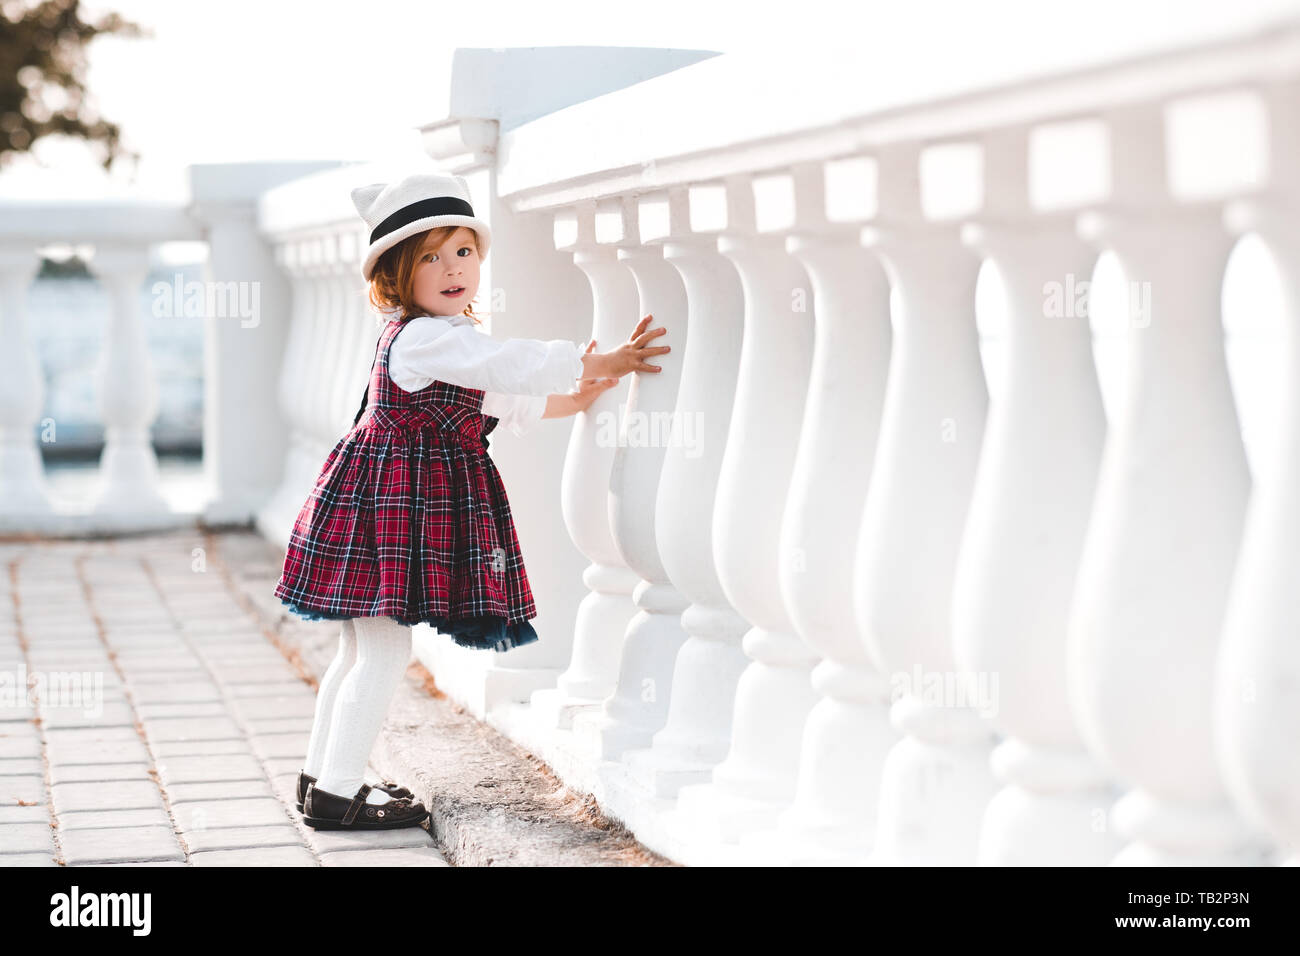 Funny pre school baby girl 2-3 year old wearing stylish dress and hat outdoors. Looking at camera. Stock Photo